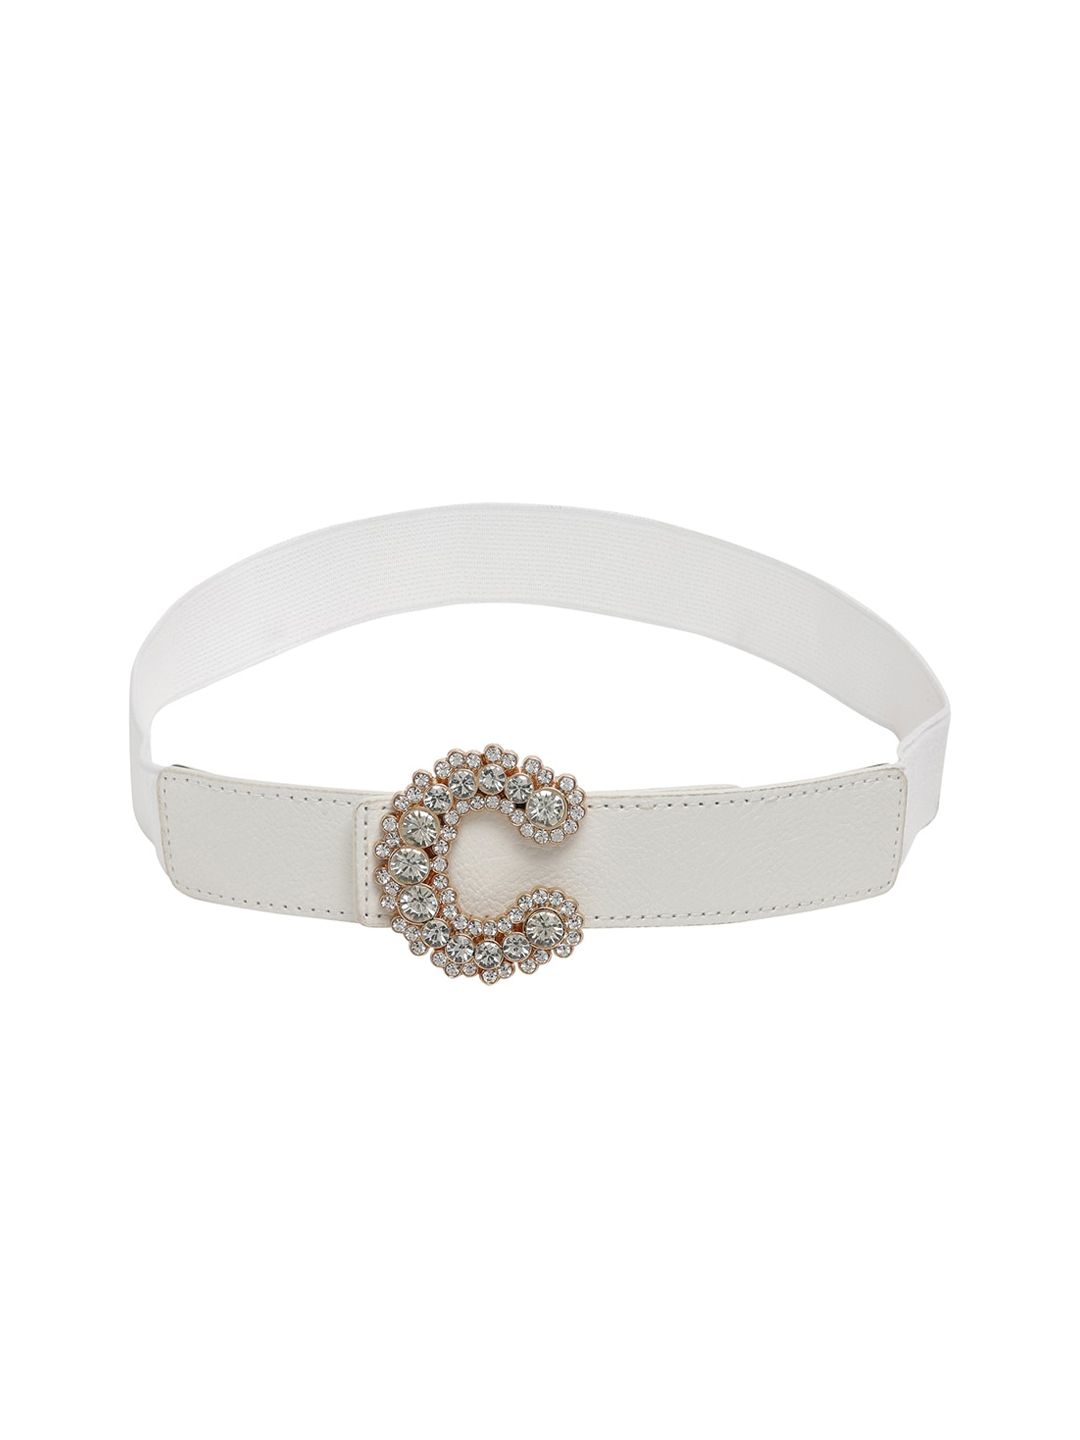 CRUSSET Women White & Silver-Toned Textured Belt Price in India